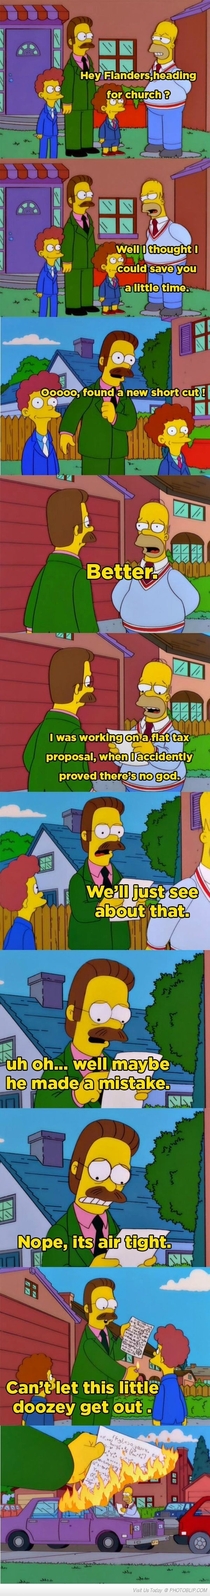 My favorite Simpsons moment to date